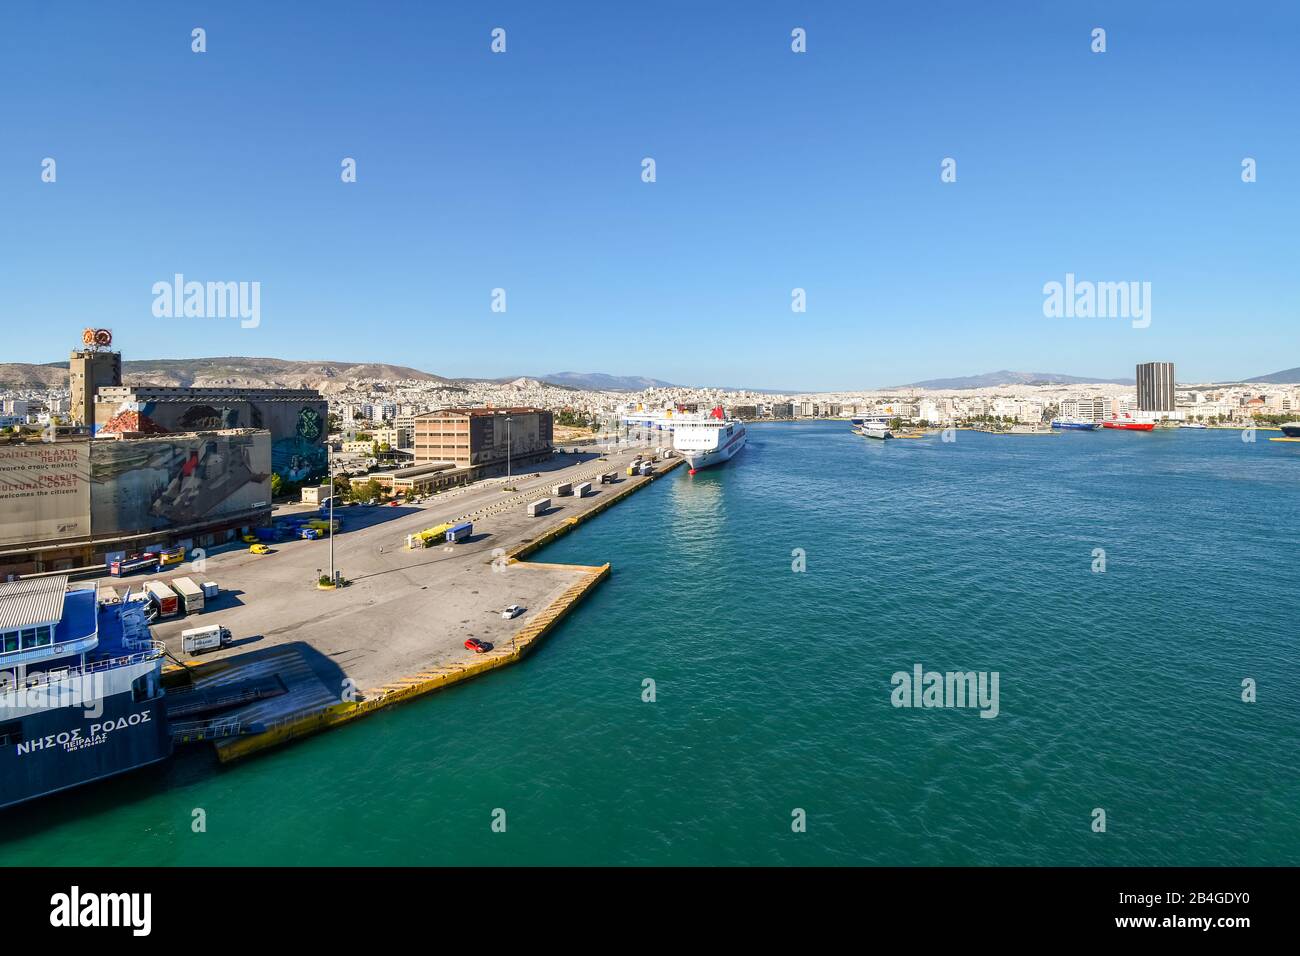 Cruise ships and ferry dock at the harbor port of Piraeus on a sunny summer day with the city of Athens Greece in view. Stock Photo